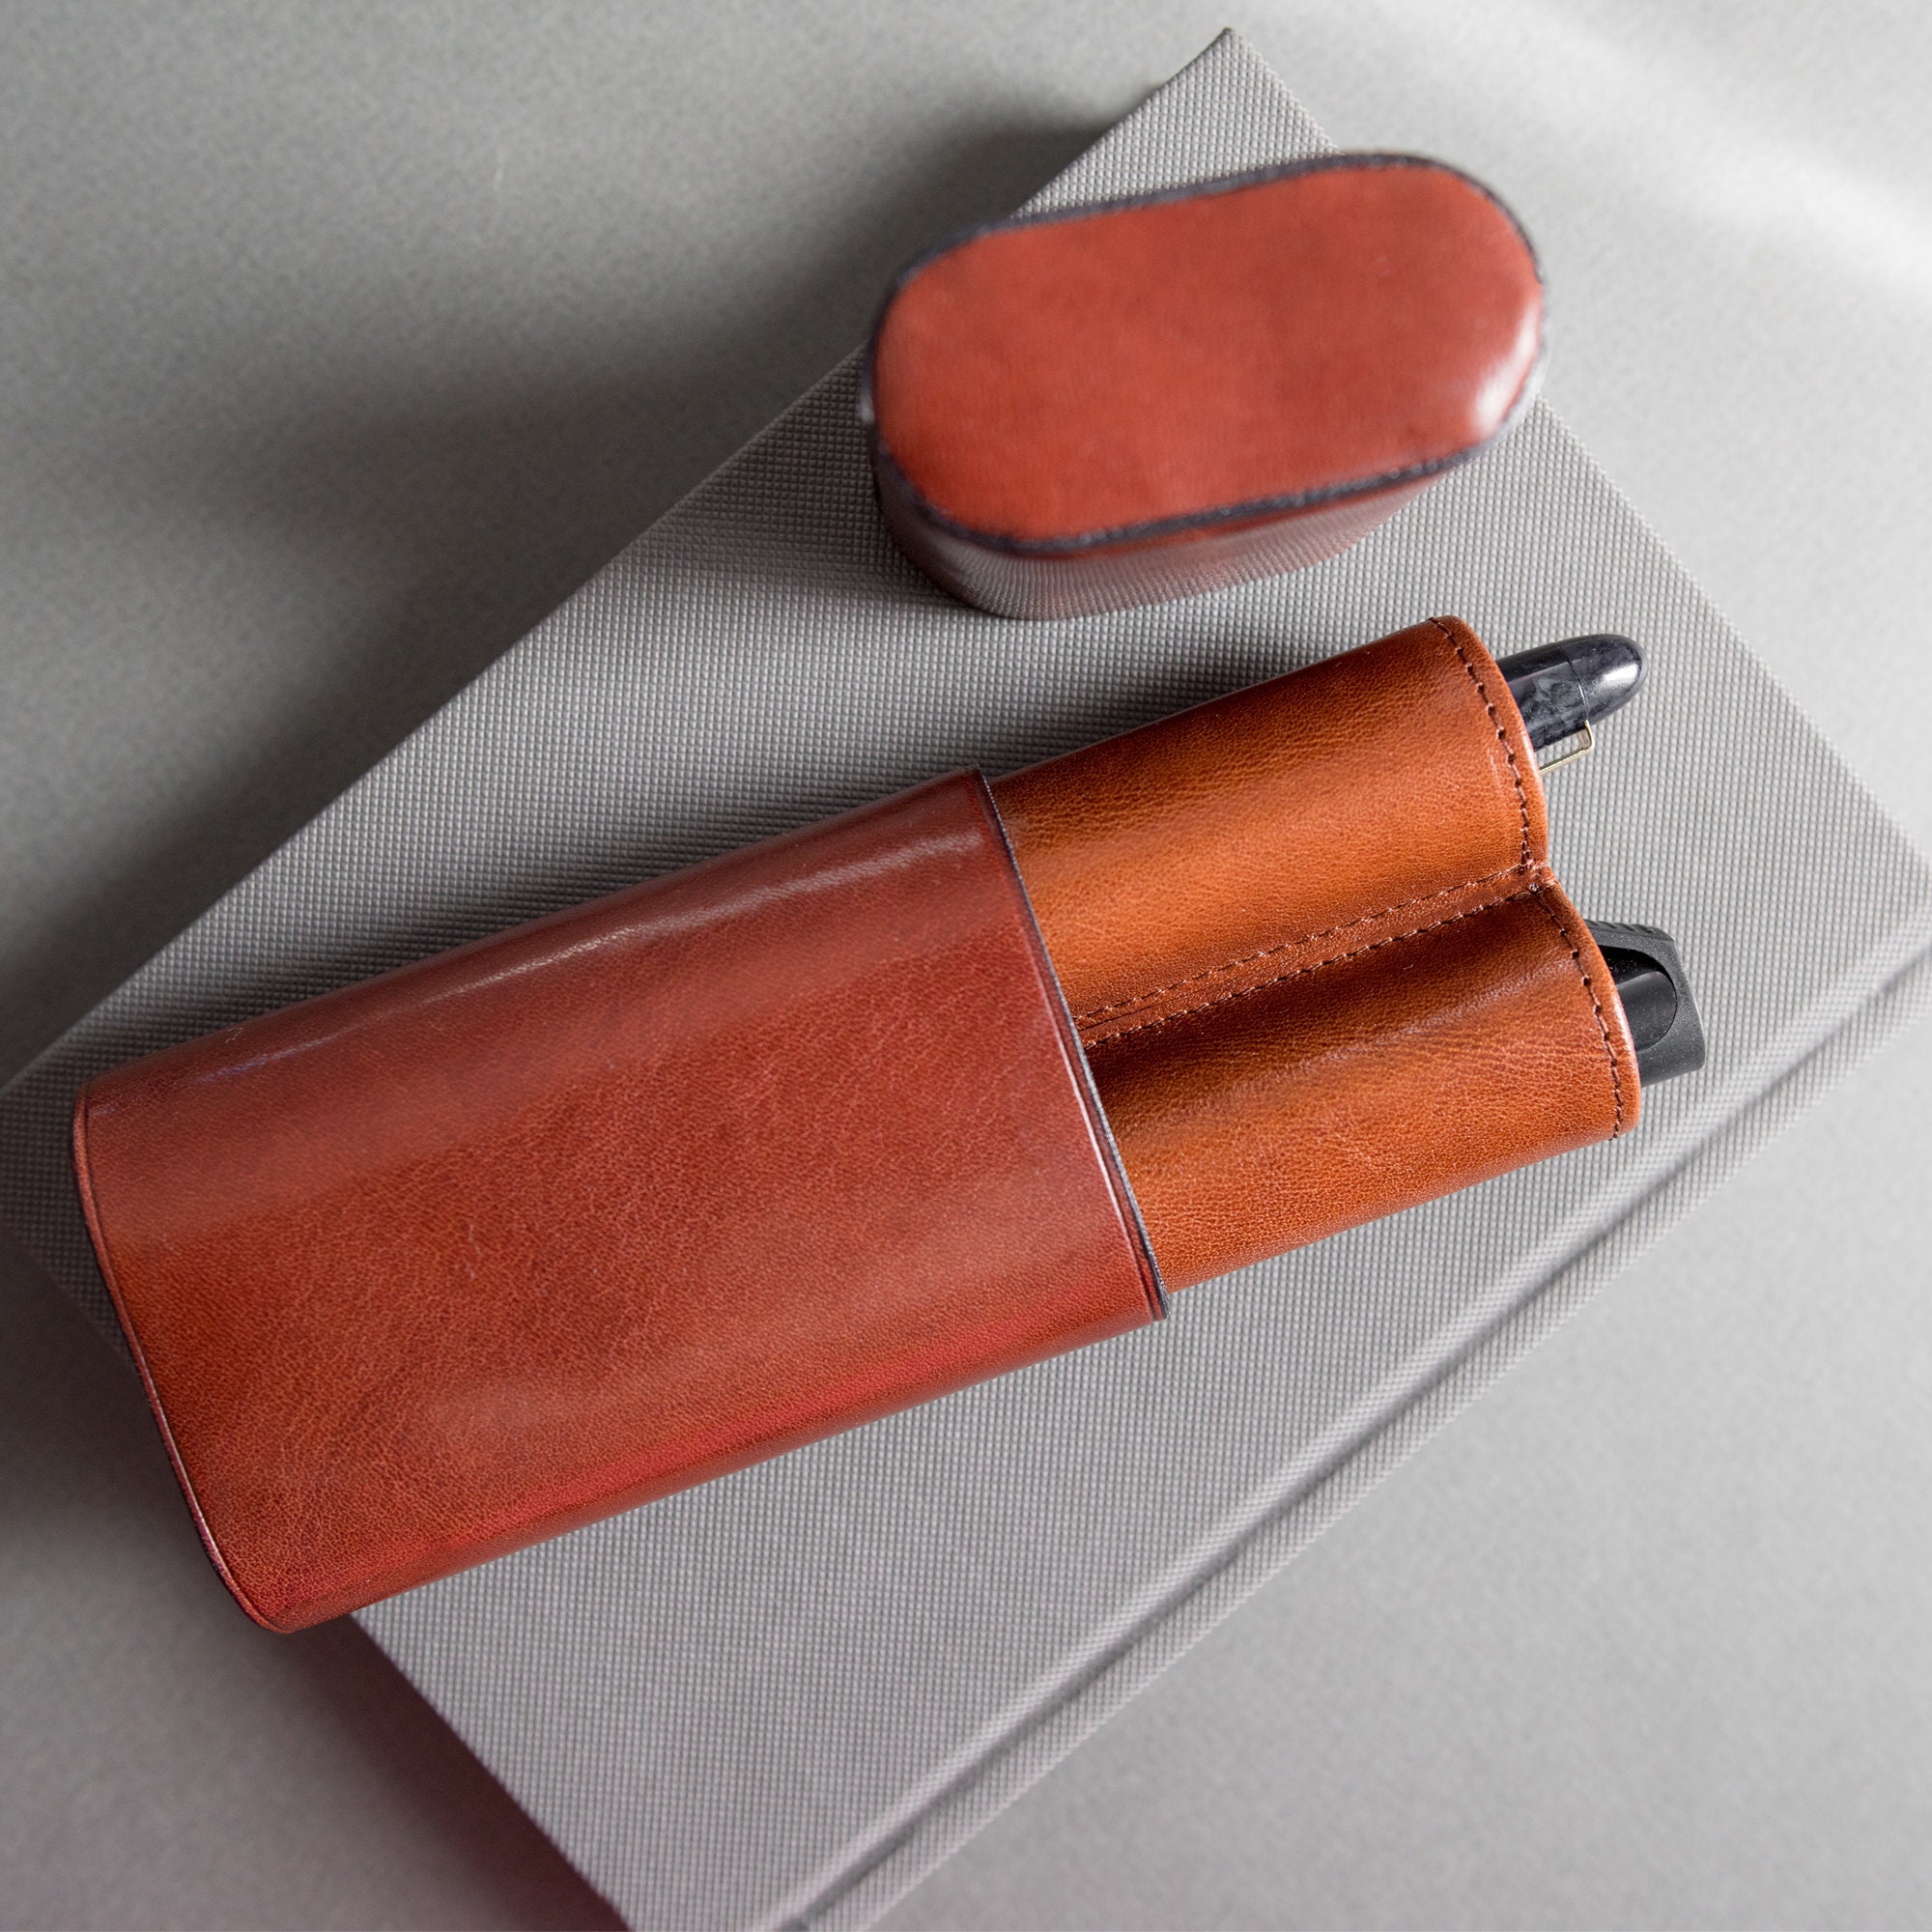 Large Leather Pen Case, Fountain Pen Case for 2 Pens, Pen Case New Job  Gift, Pen Holder Gift for Writer, Personalized Leather Gift for Him. -   Israel